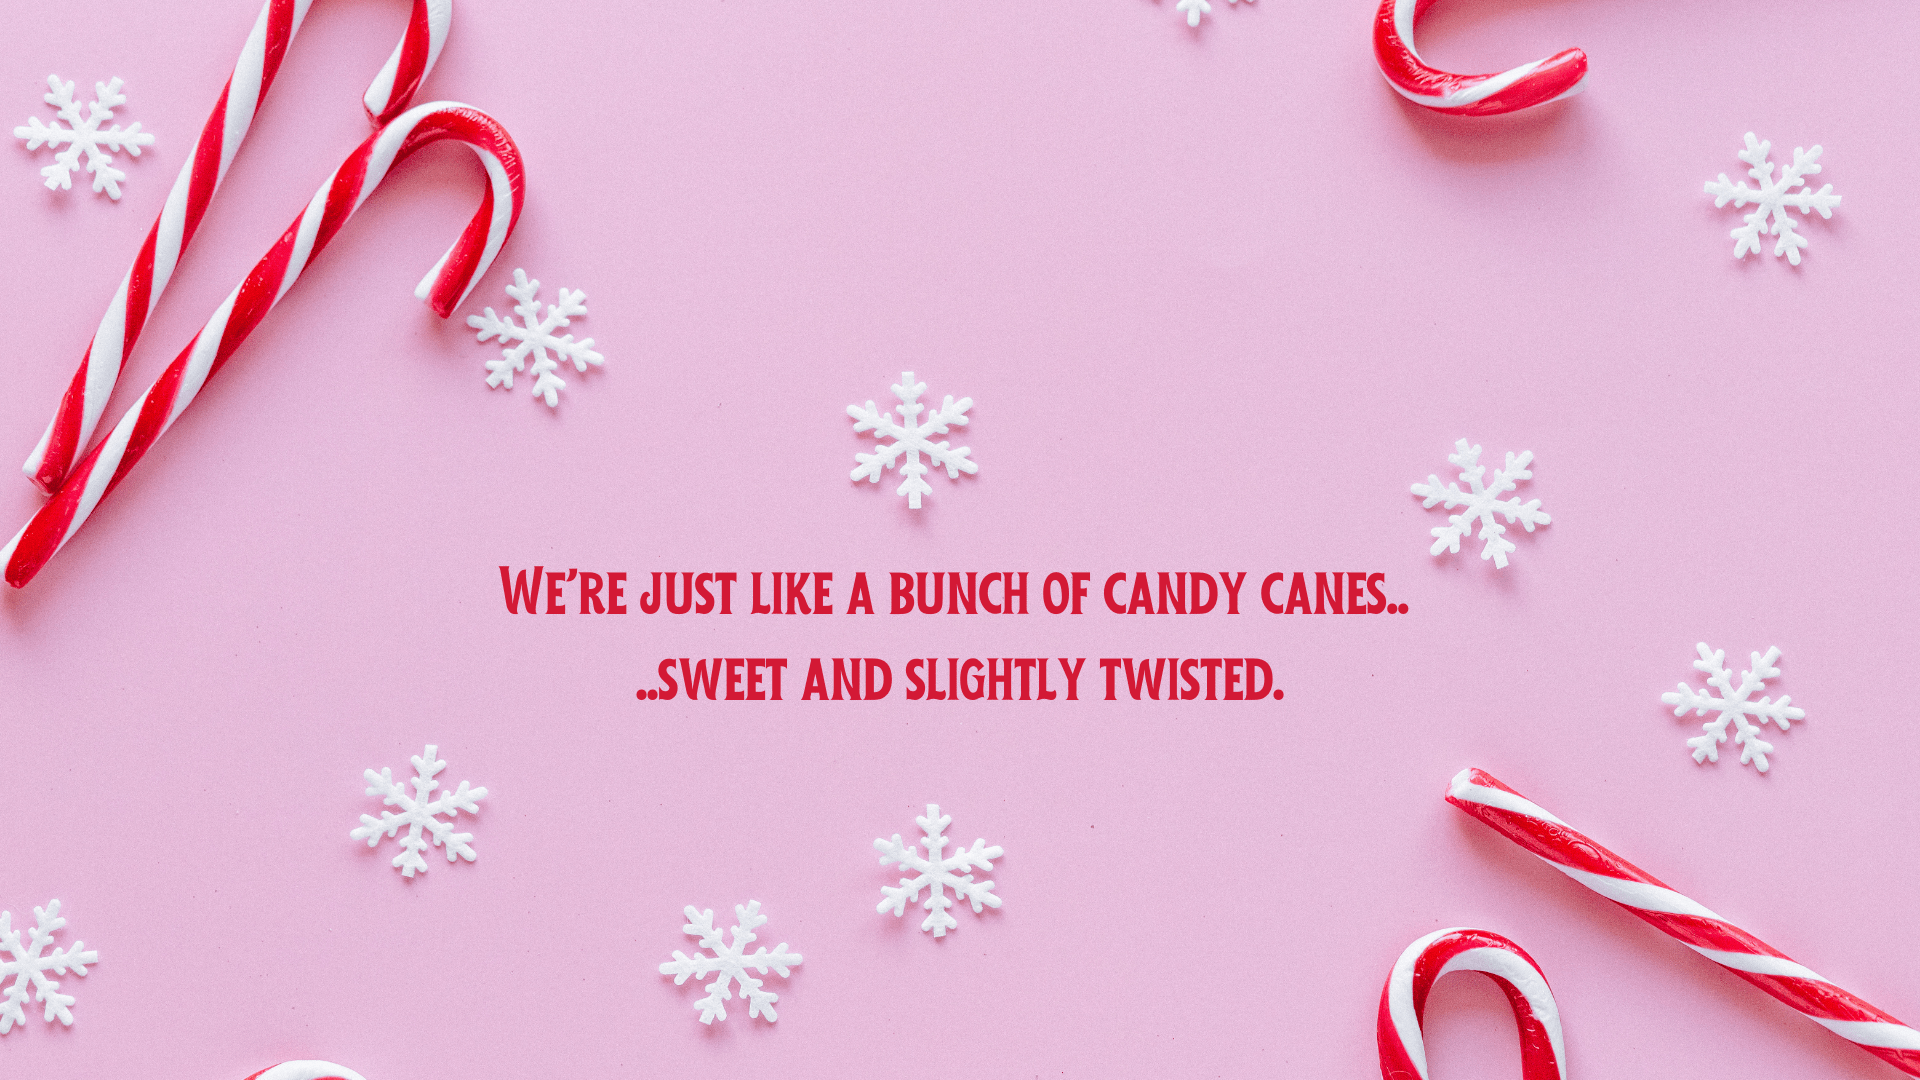 A pink background with candy canes and snowflakes - Candy, candy cane